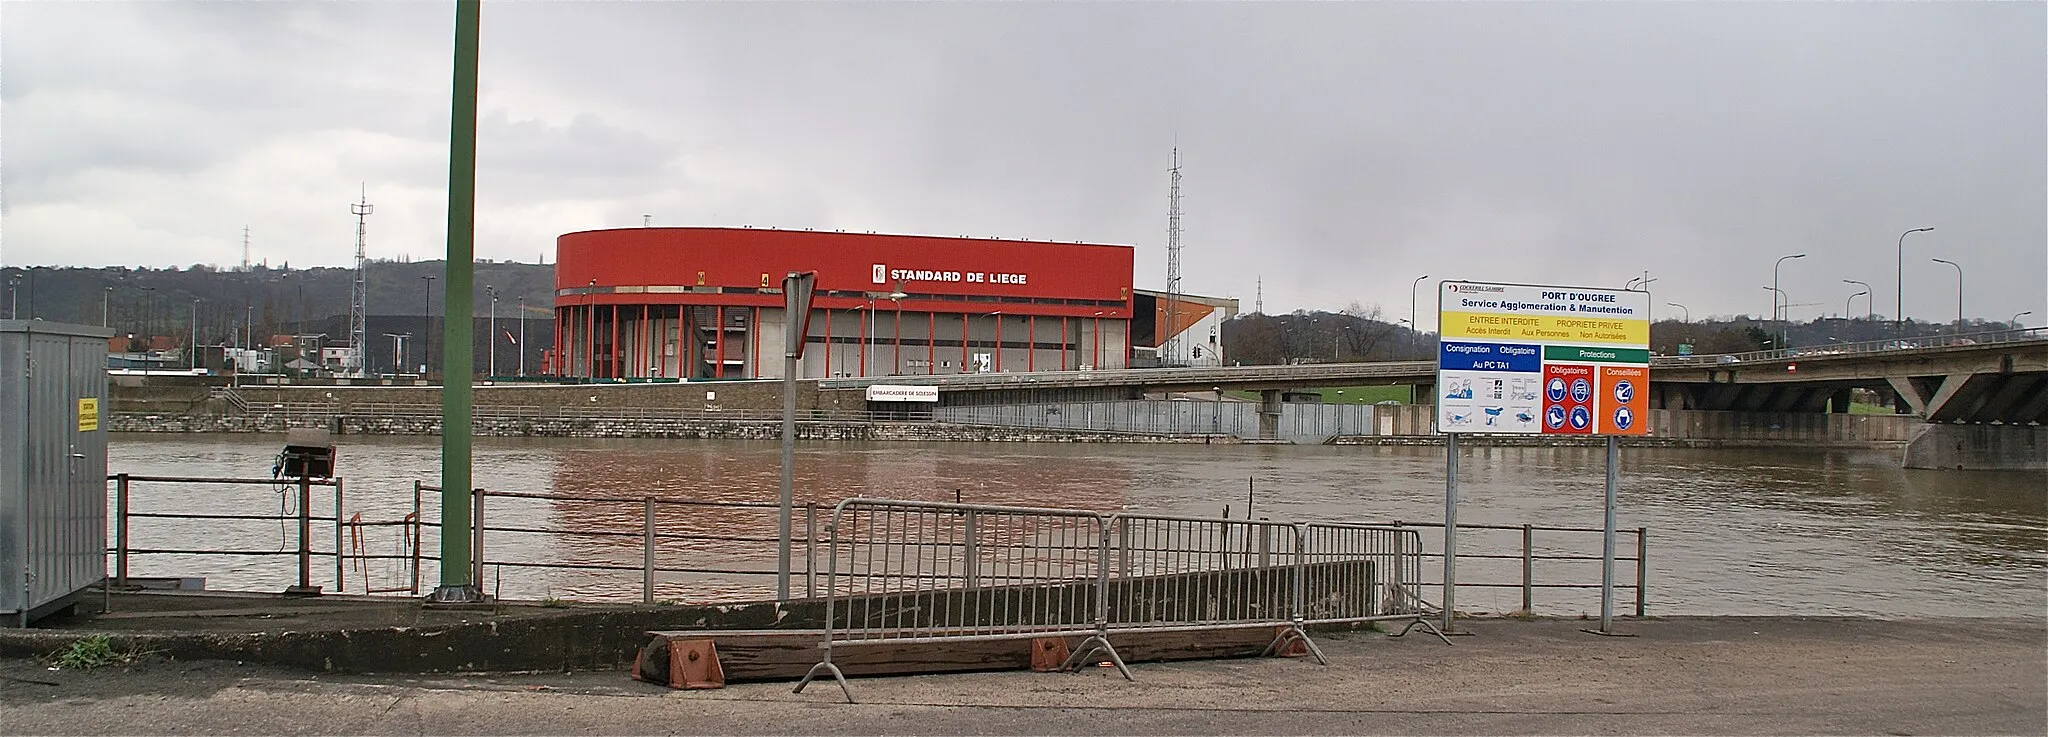 Photo showing: Seraing (Ougrée), Belgium: The Football stadium of Standard Liège as seen from the Port of Ougrée